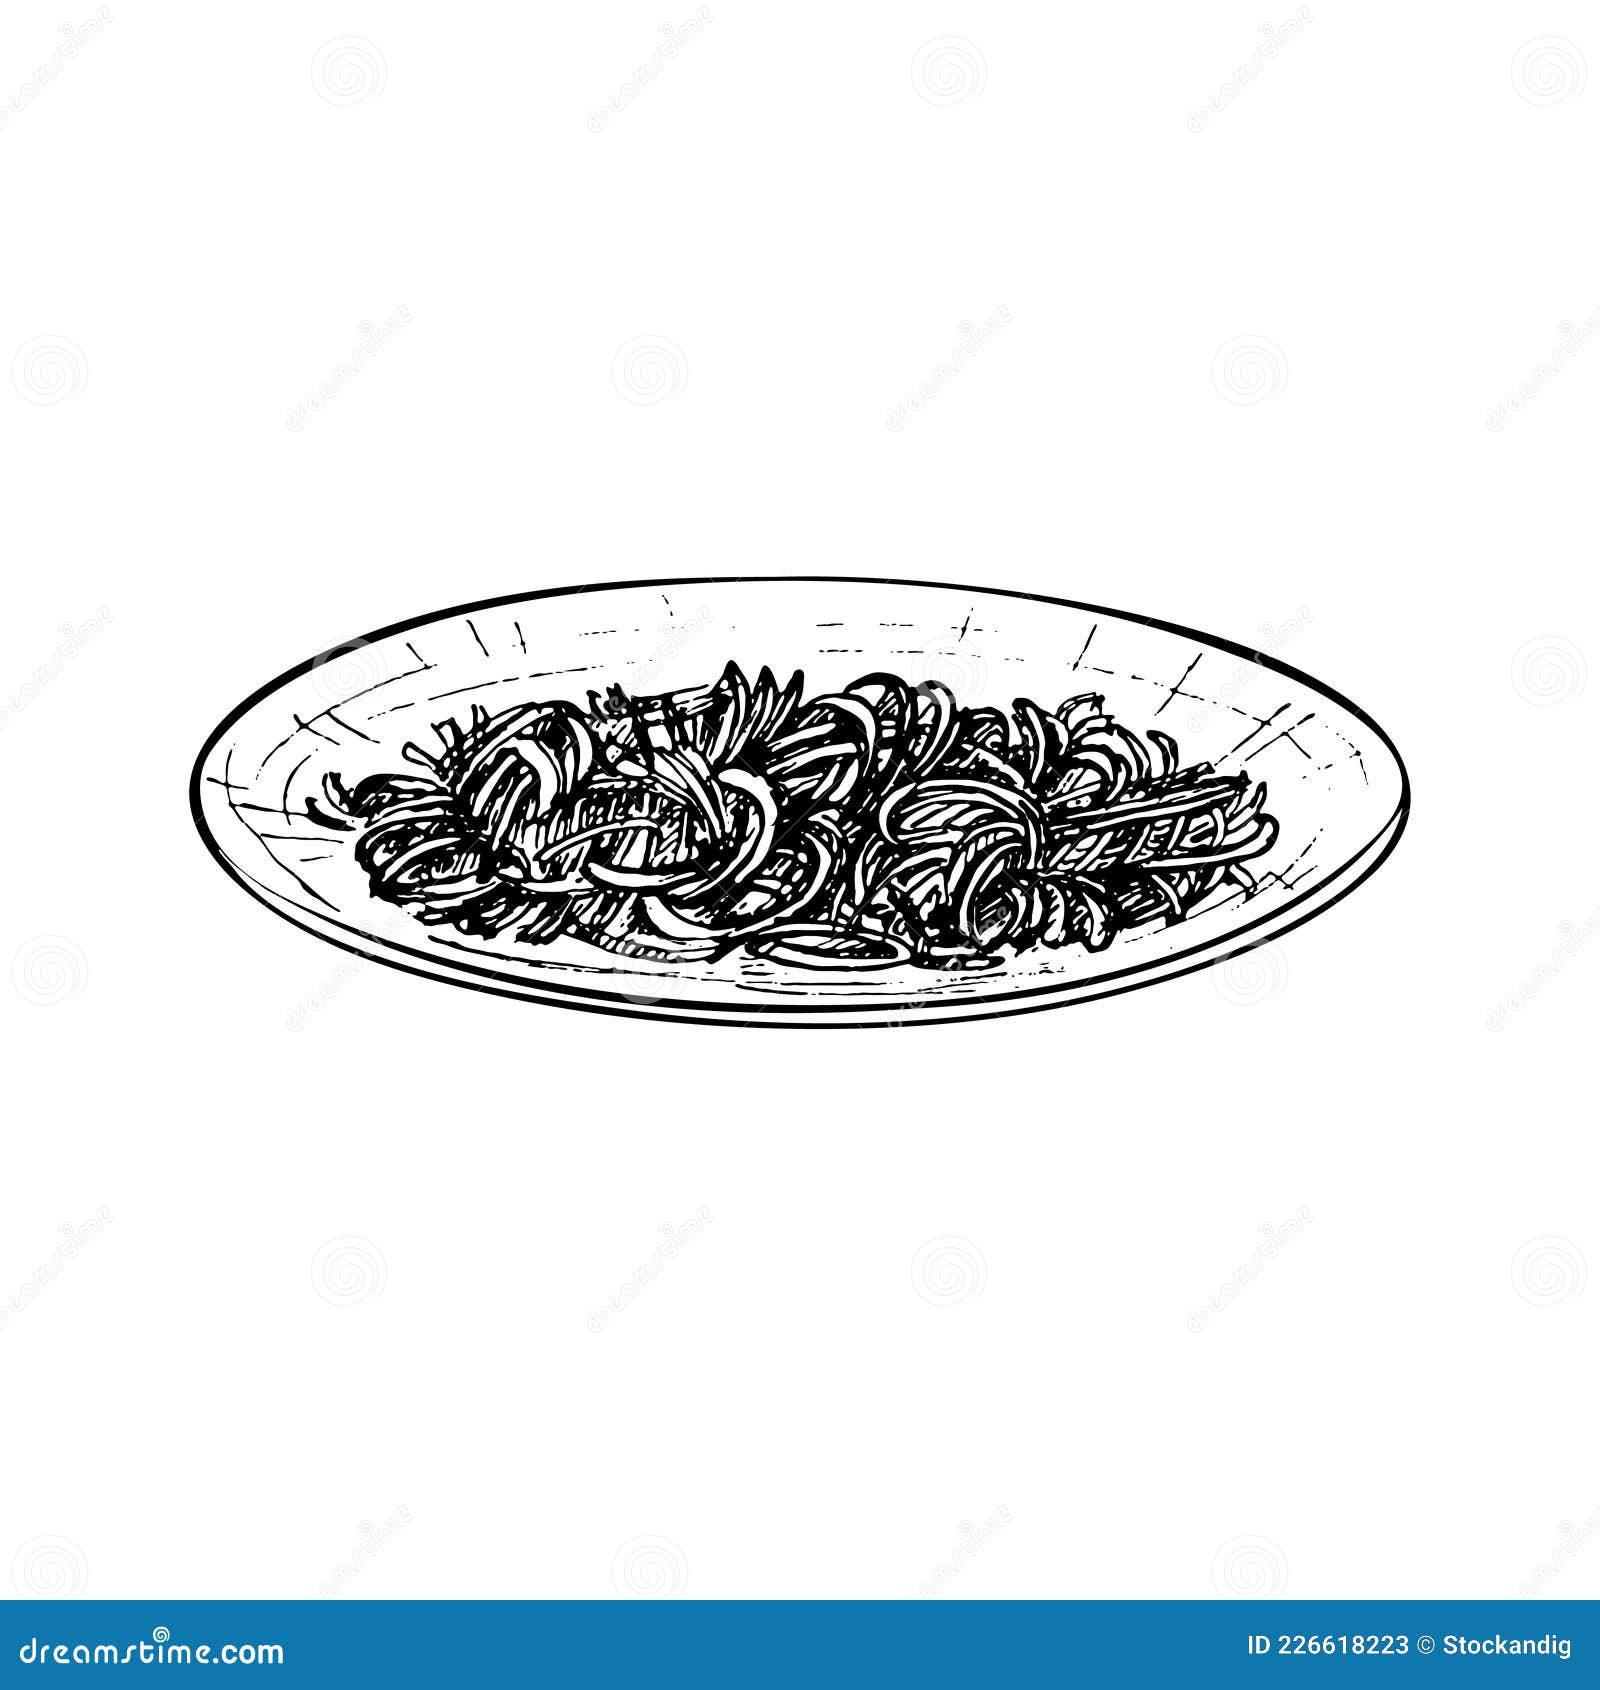 Chow Mein on Plate. Vintage Vector Hatching Hand Drawn Illustration ...